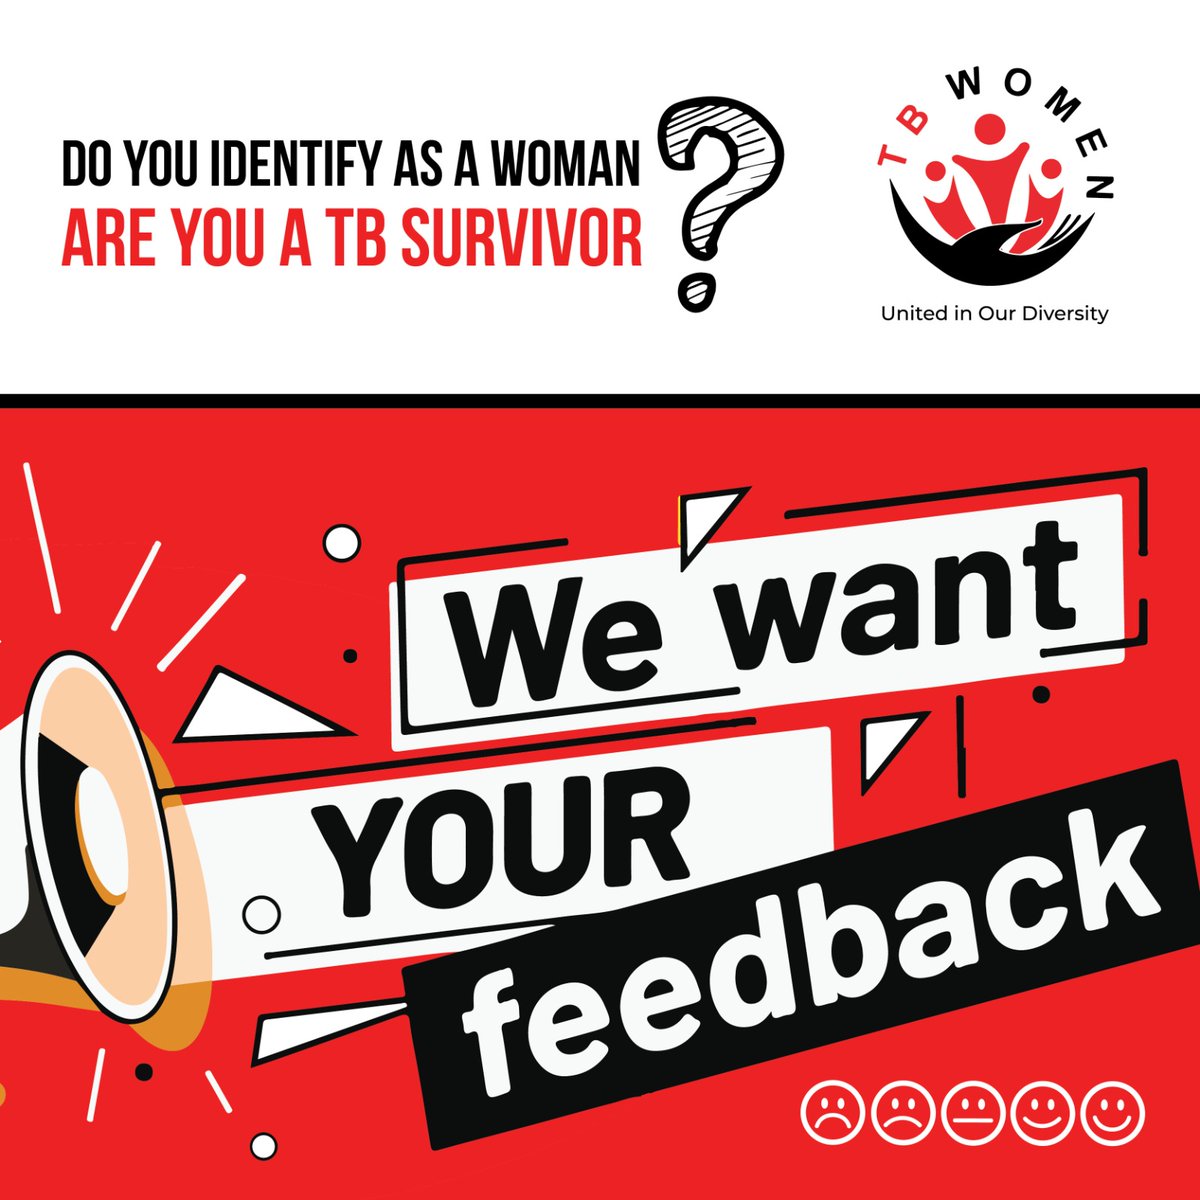 we need your feedback .Use the hyperlink below to offer your valuable feedback . Your inpt is greatly appreciated.shorturl.at/pDOU4. @SATB1231 .@TBChampions_ke .@maureenmurenga .@TBAlliance .@StopTBKe .@pamojatbgroup .@GlobalTB